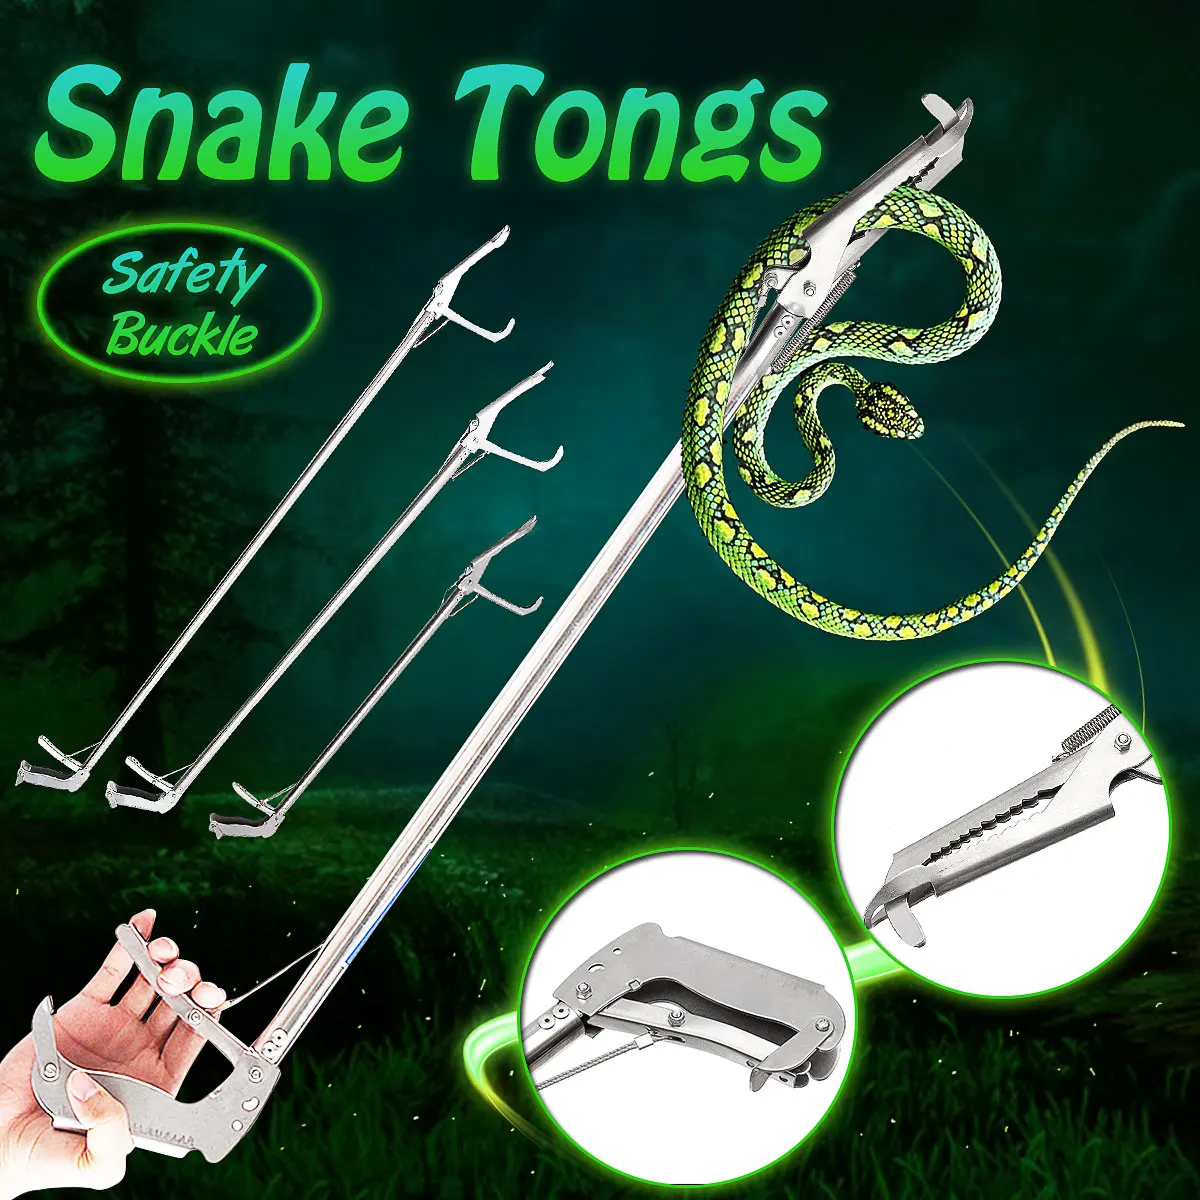 Quickly Reptile Snake Catcher Tongs Stick Professional Stainless Steel Pest Control Product Grabber Jaw Tool Gloves